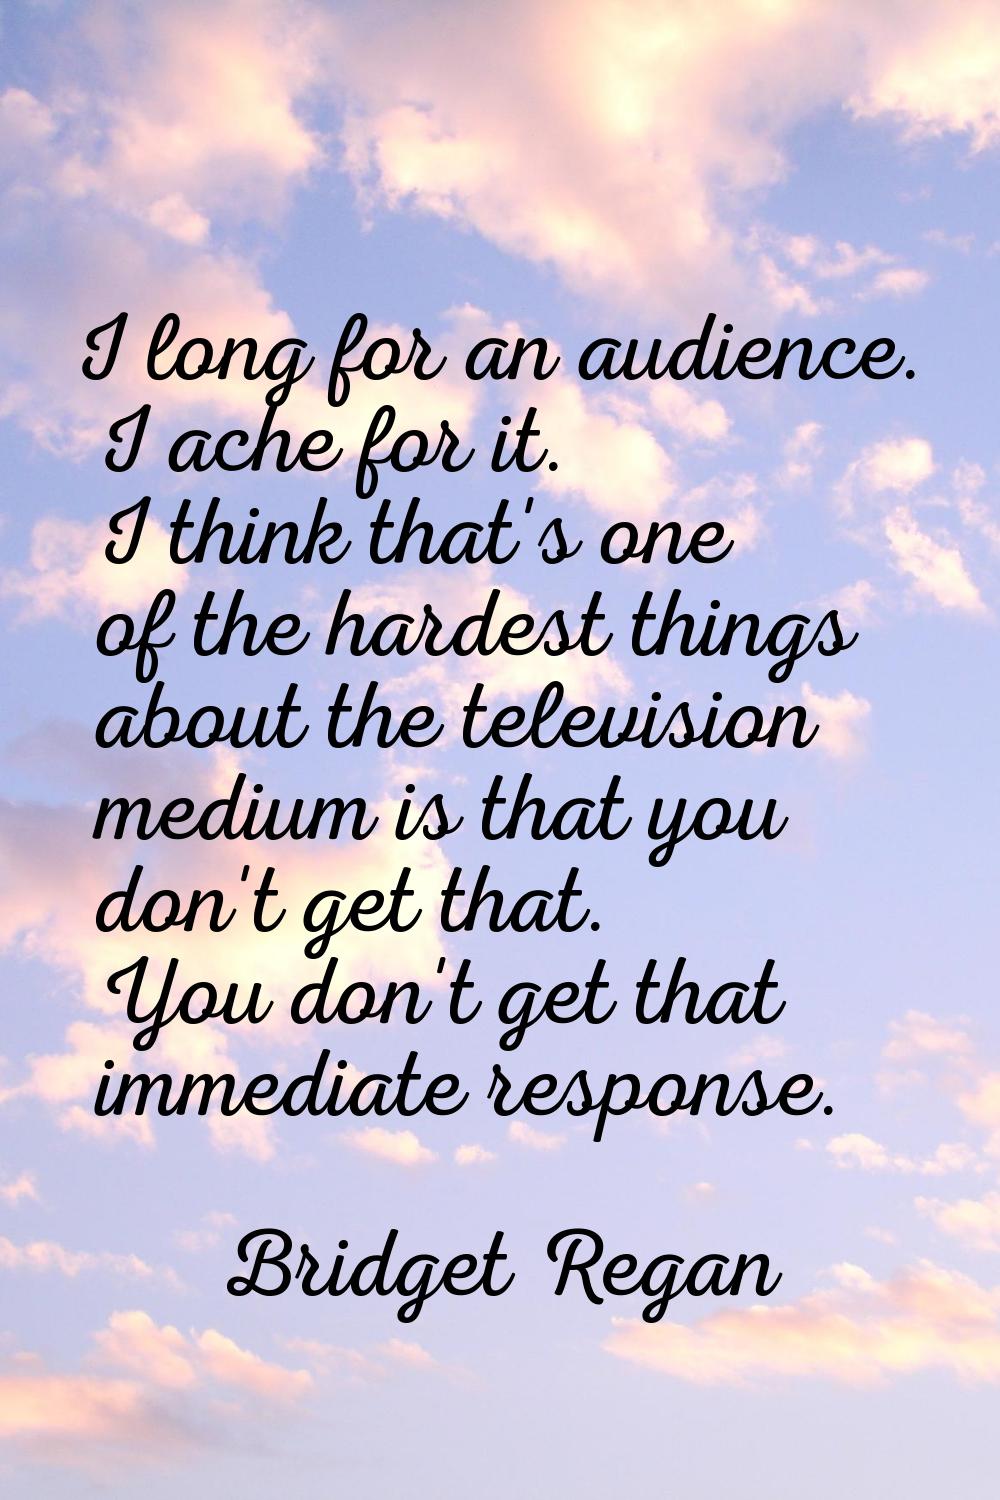 I long for an audience. I ache for it. I think that's one of the hardest things about the televisio